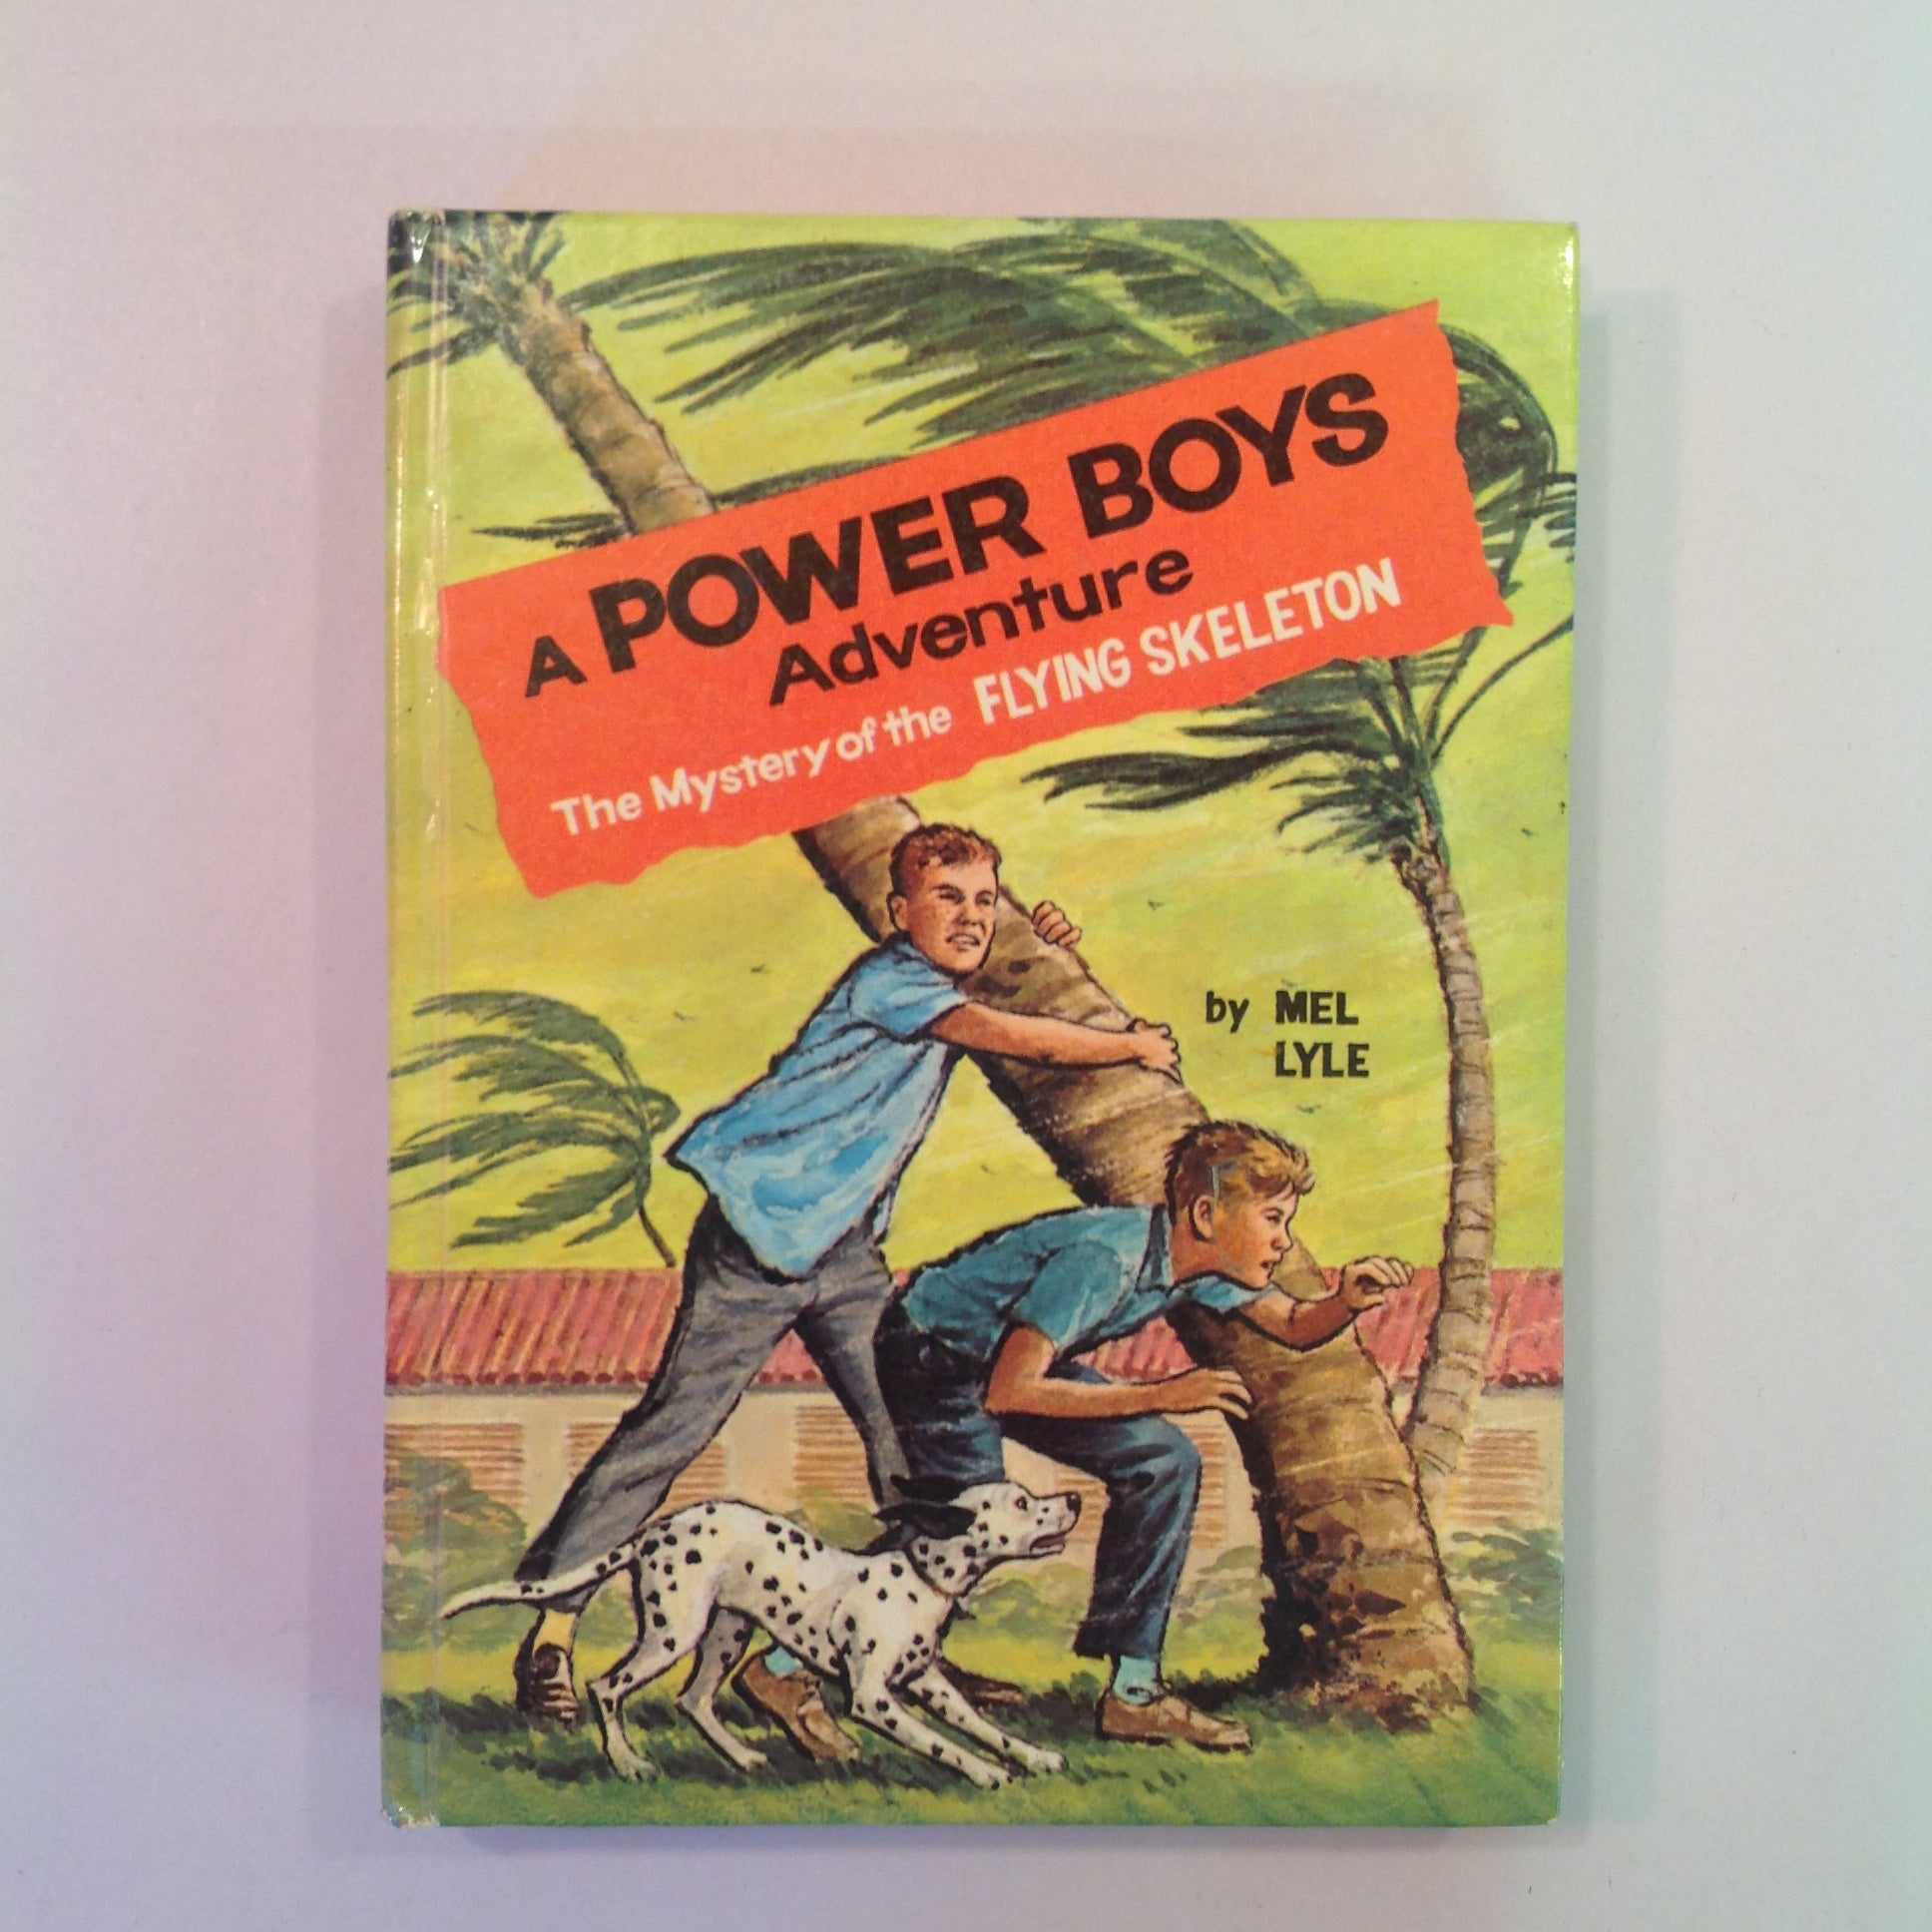 Vintage 1964 Children's Hardcover The Mystery of the Flying Skeleton: A Power Boys Adventure Mel Lyle Whitman